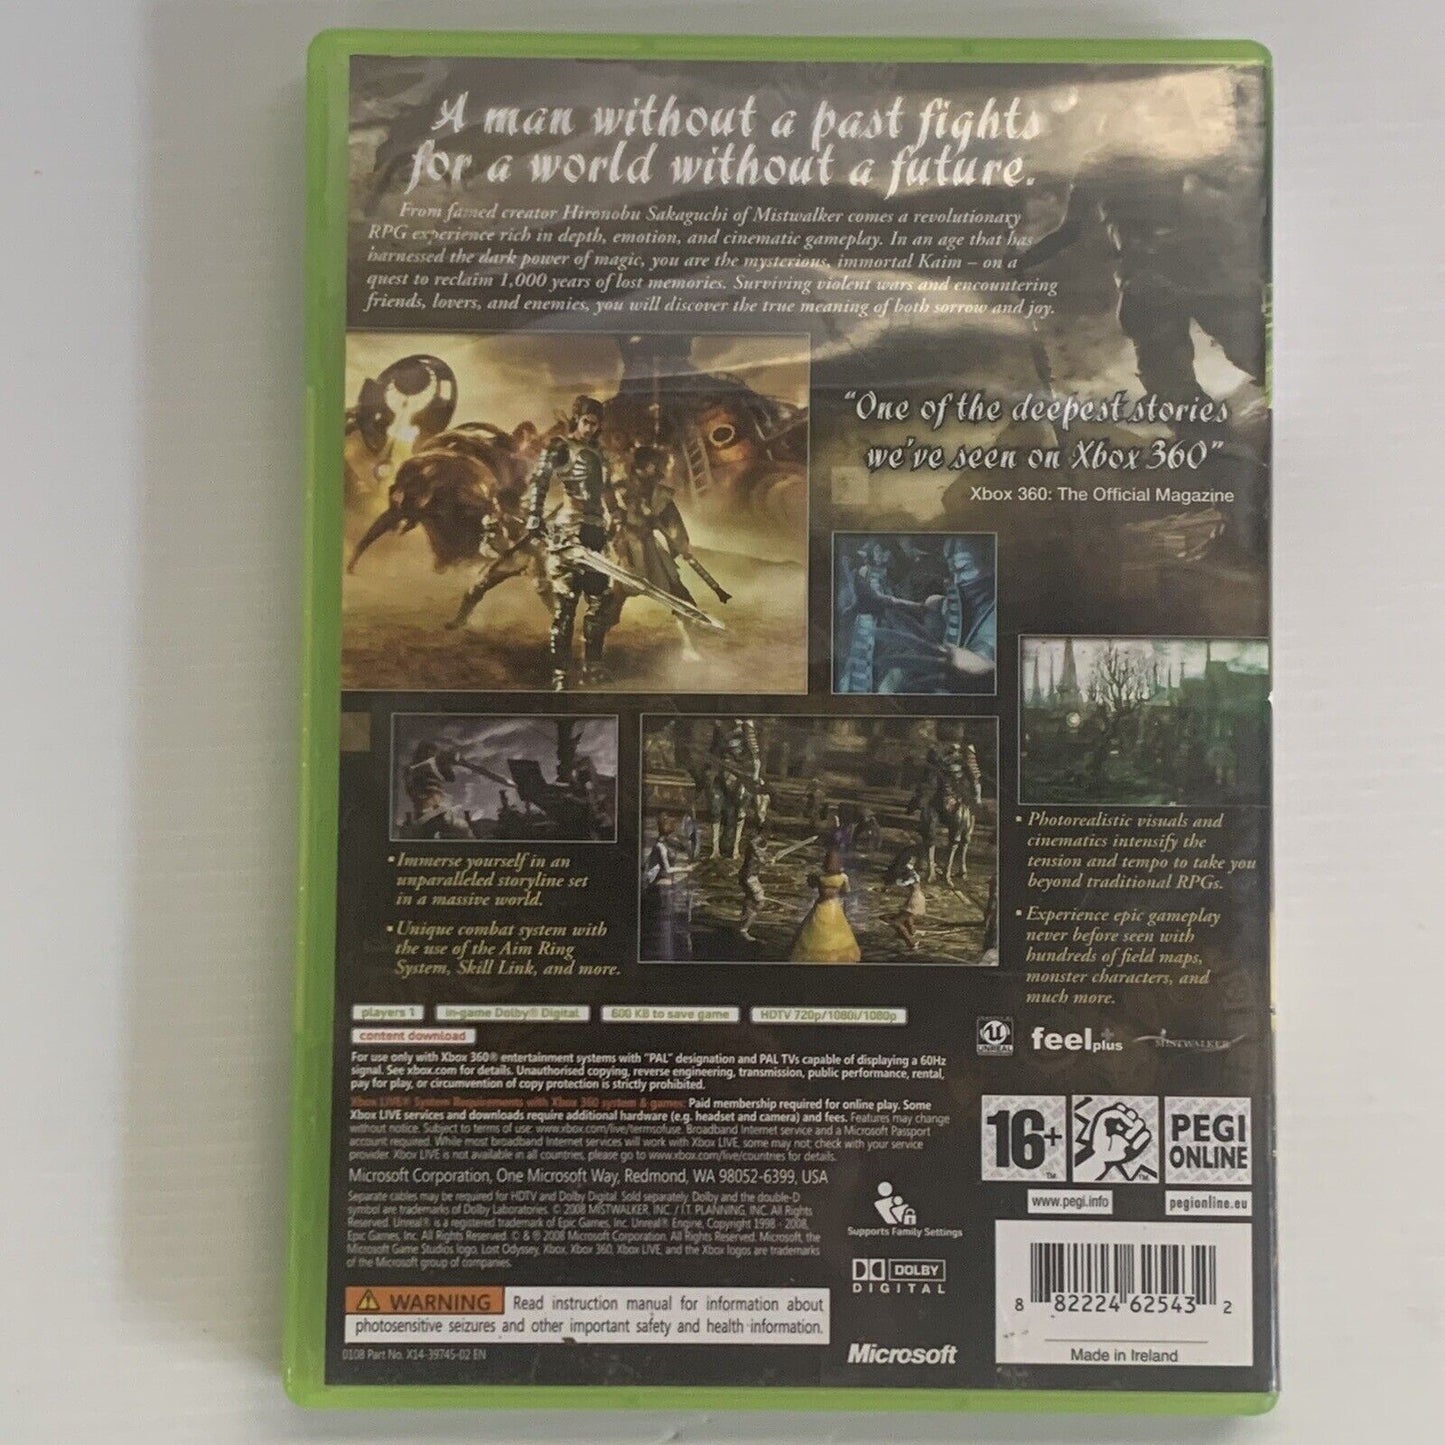 Lost Odyssey Xbox 360 Game 4 Disc Set